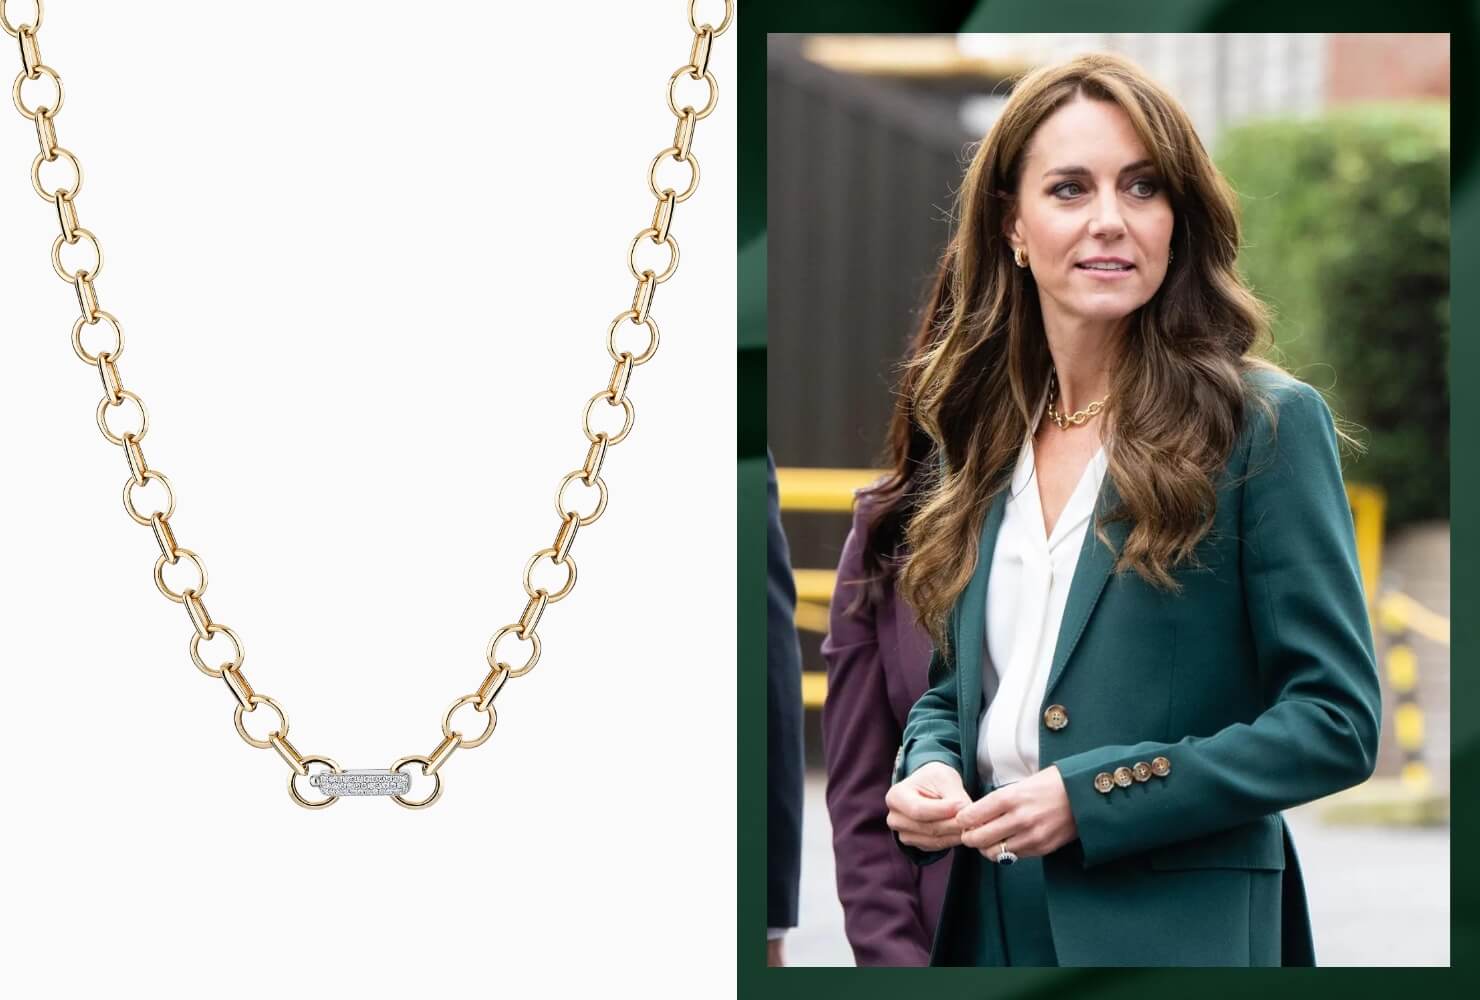 Image of Ecksand's Duel Oversized Diamond Chain Necklace next to an image of Kate Middleton wearing a similar necklace